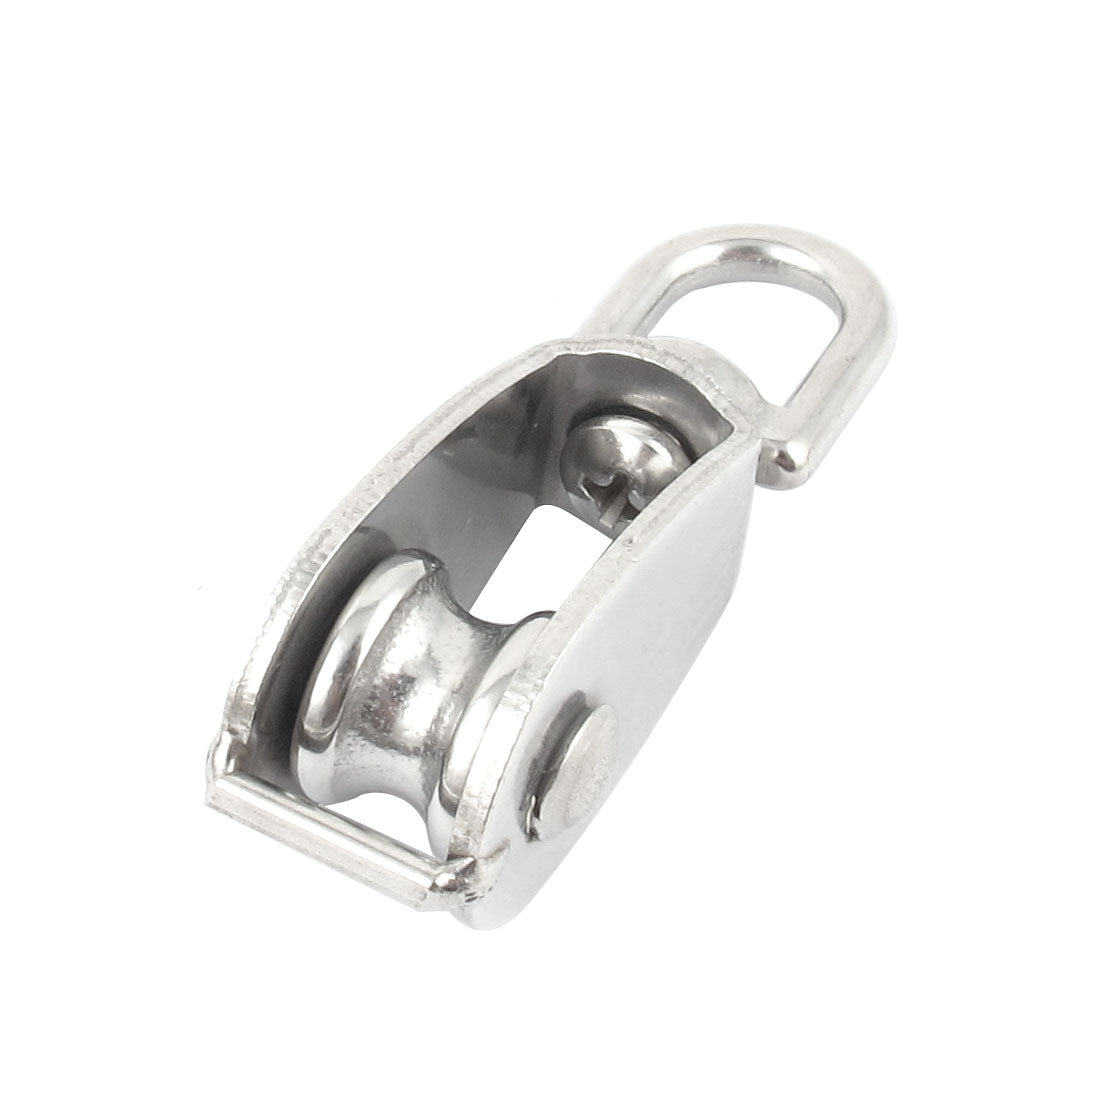 uxcell Uxcell 15mm Silver Tone Stainless Steel Single Sheave Swivel Eye Wire Rope Pulley 0.035 Ton